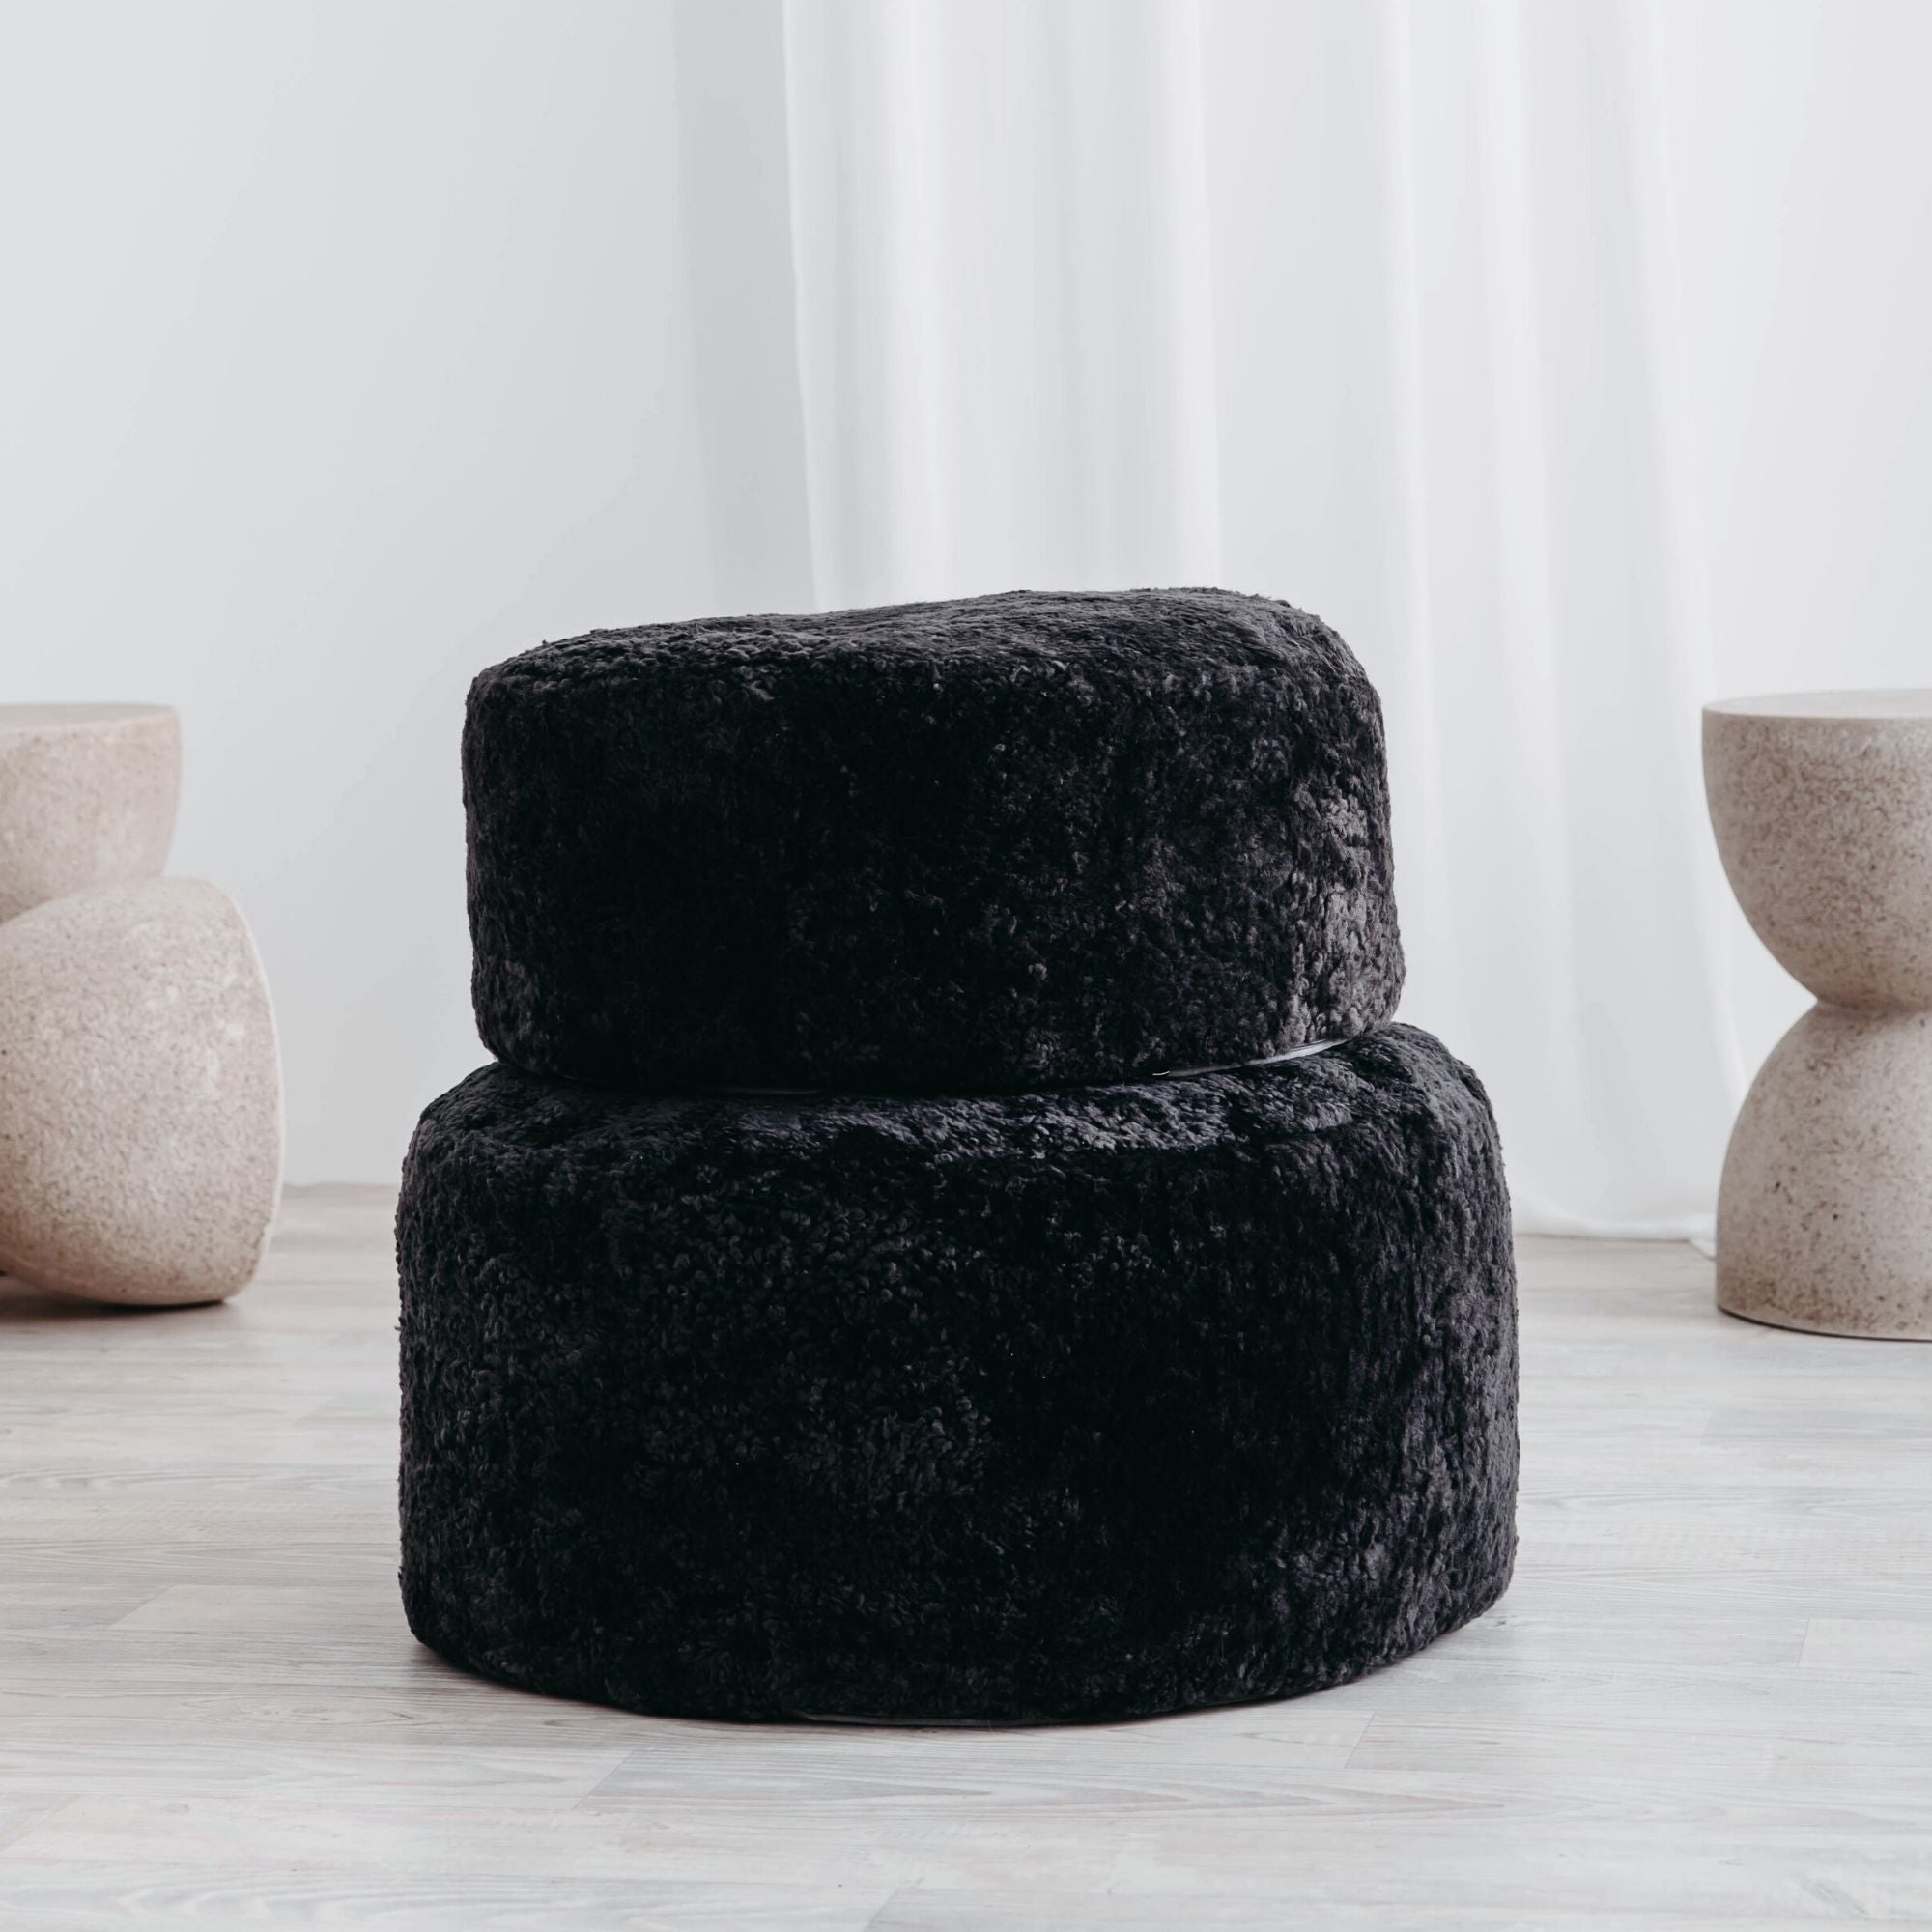 Bring natural texture and contemporary design into your space with the sturdy and stylish handmade Jamieson Round Ottoman. Choose between two sizes and three beautiful modern colours, or mix-and-match